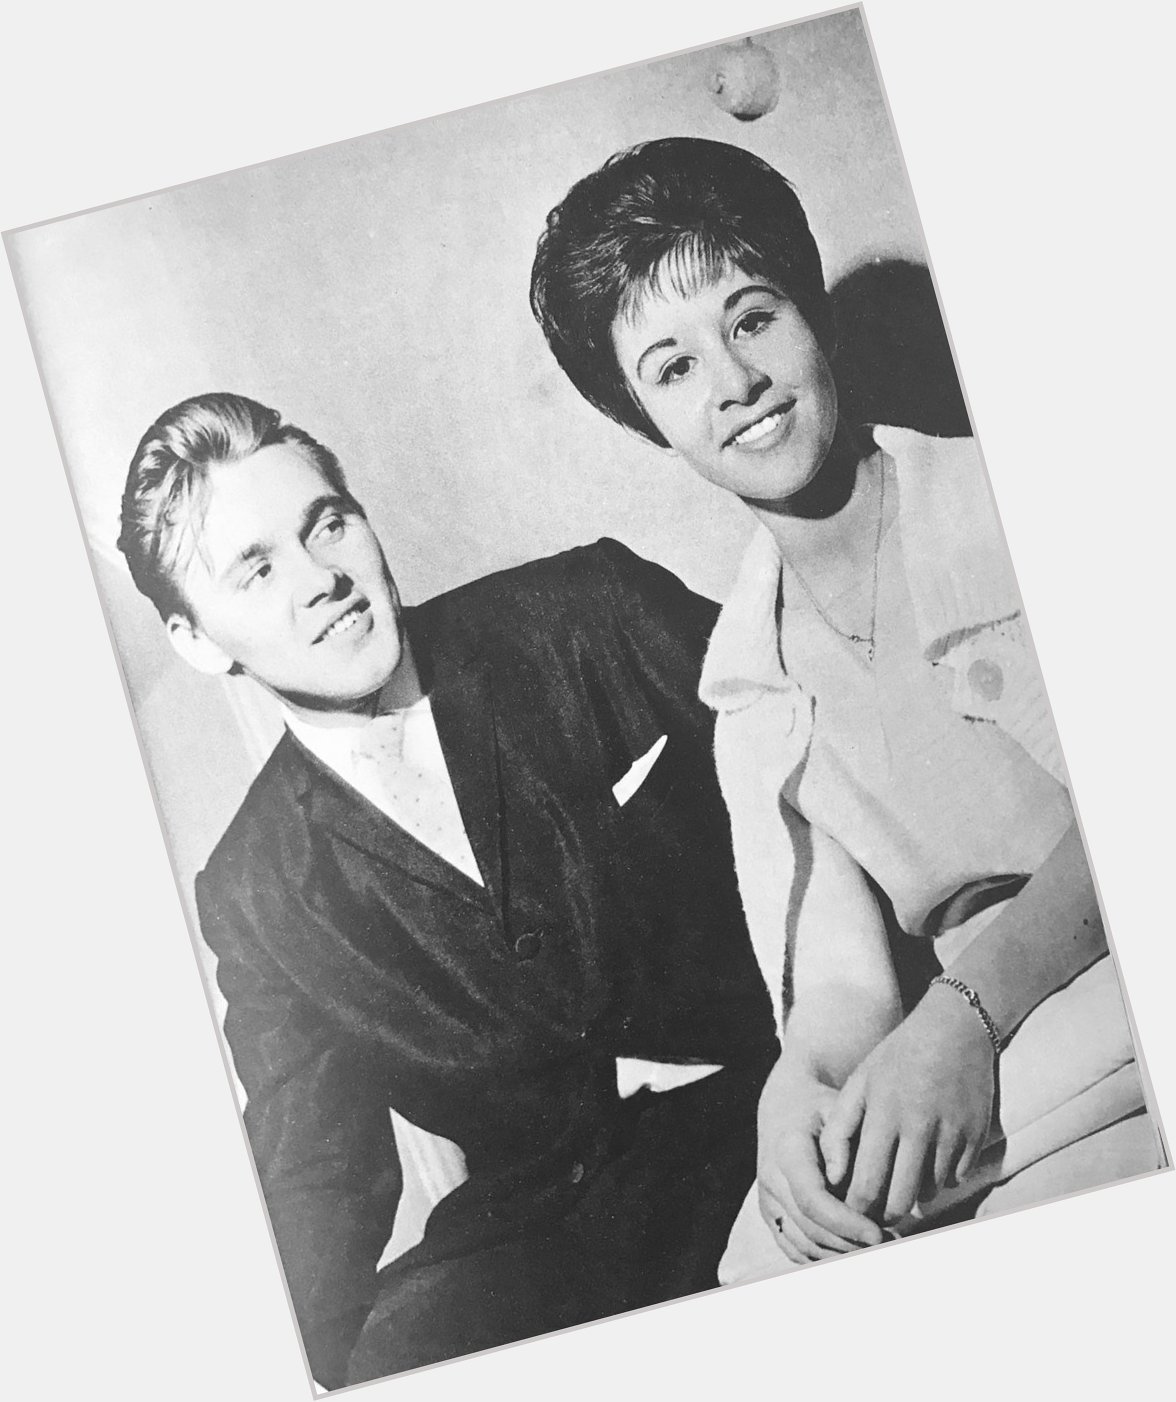 Happy Birthday today to the wonderful Helen Shapiro, born on this day in 1946.  